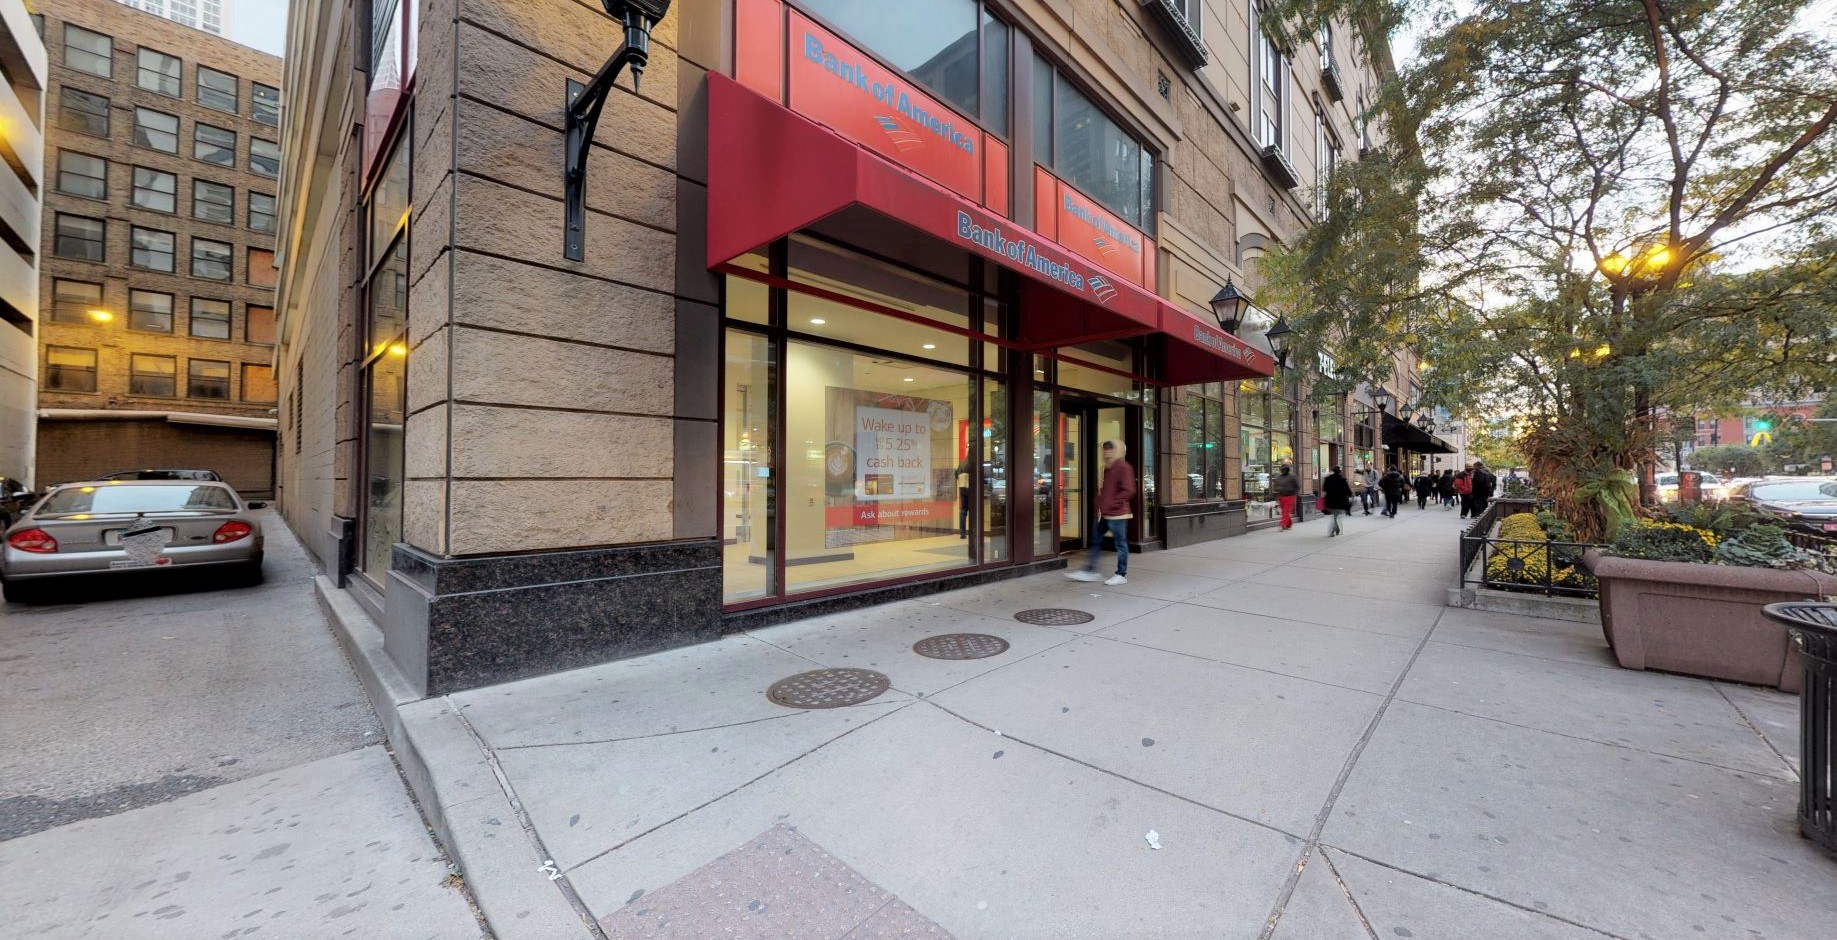 Bank of America financial center with walk-up ATM | 49 E Chicago Ave, Chicago, IL 60611